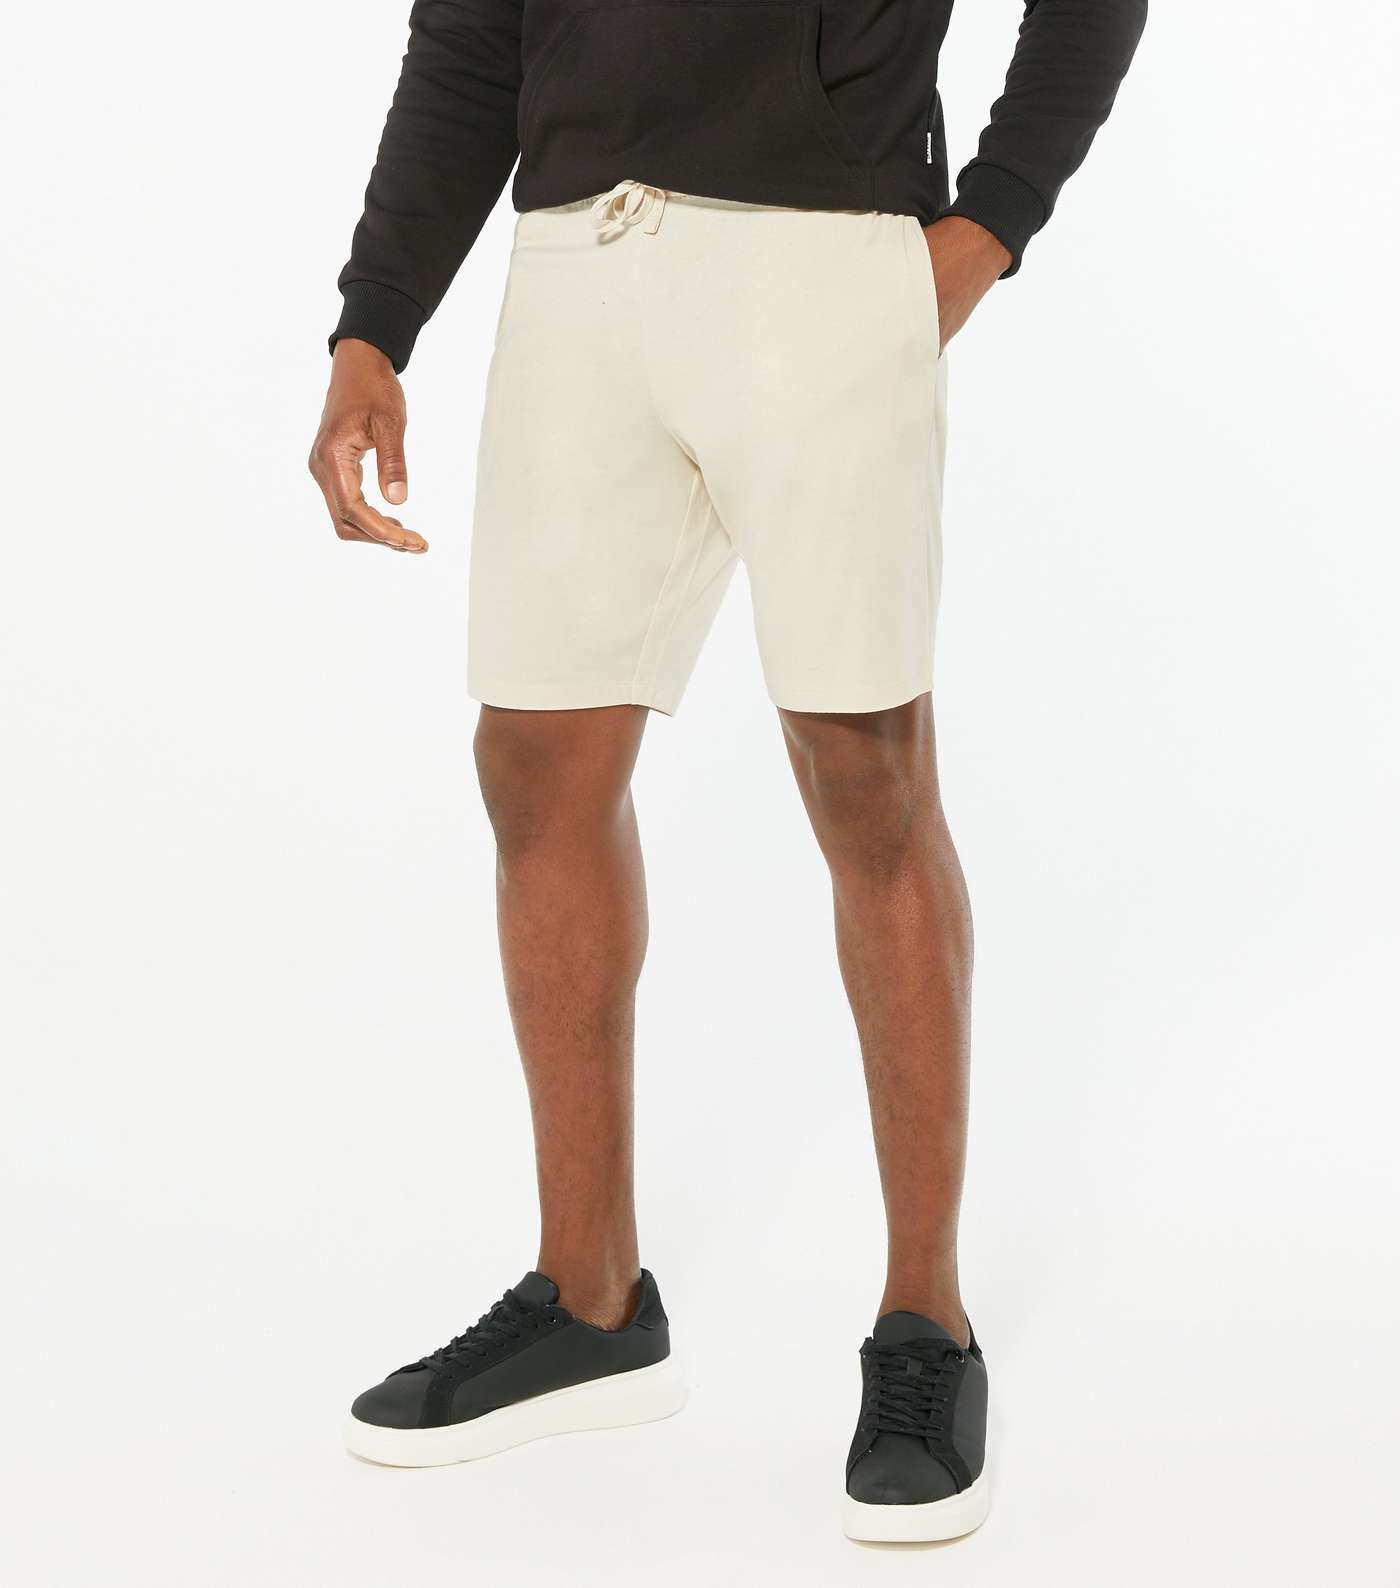 2 Pack Off White and Black Shorts Image 2